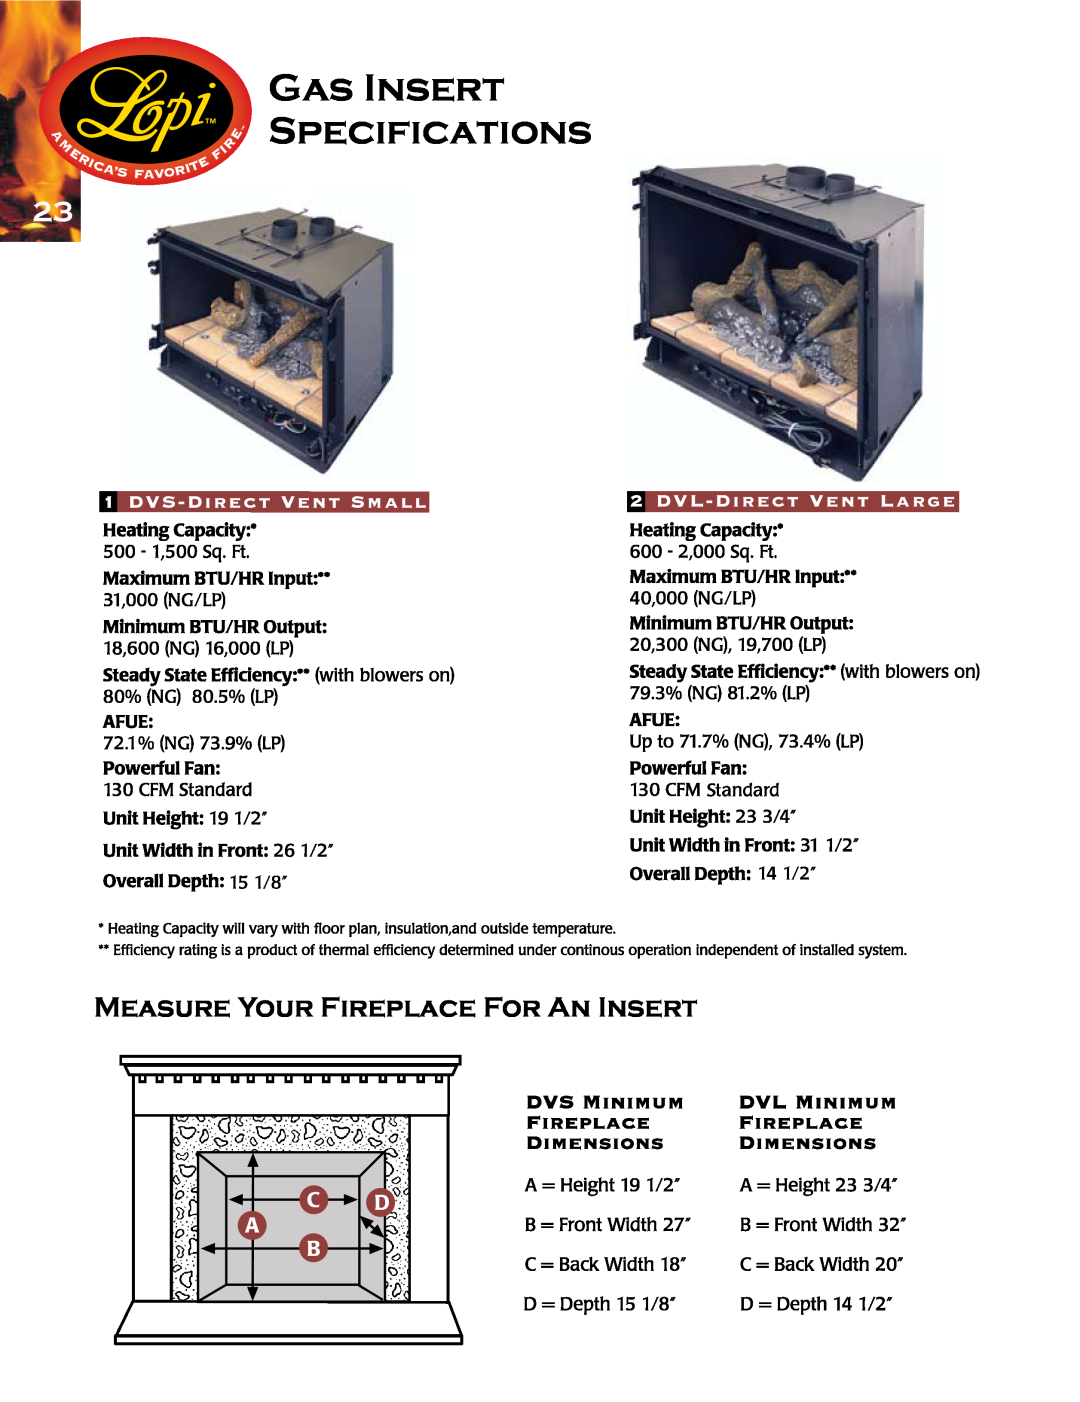 Lopi Gas Stove And Fireplace manual Gas Insert Specifications, Measure Your Fireplace For An Insert 